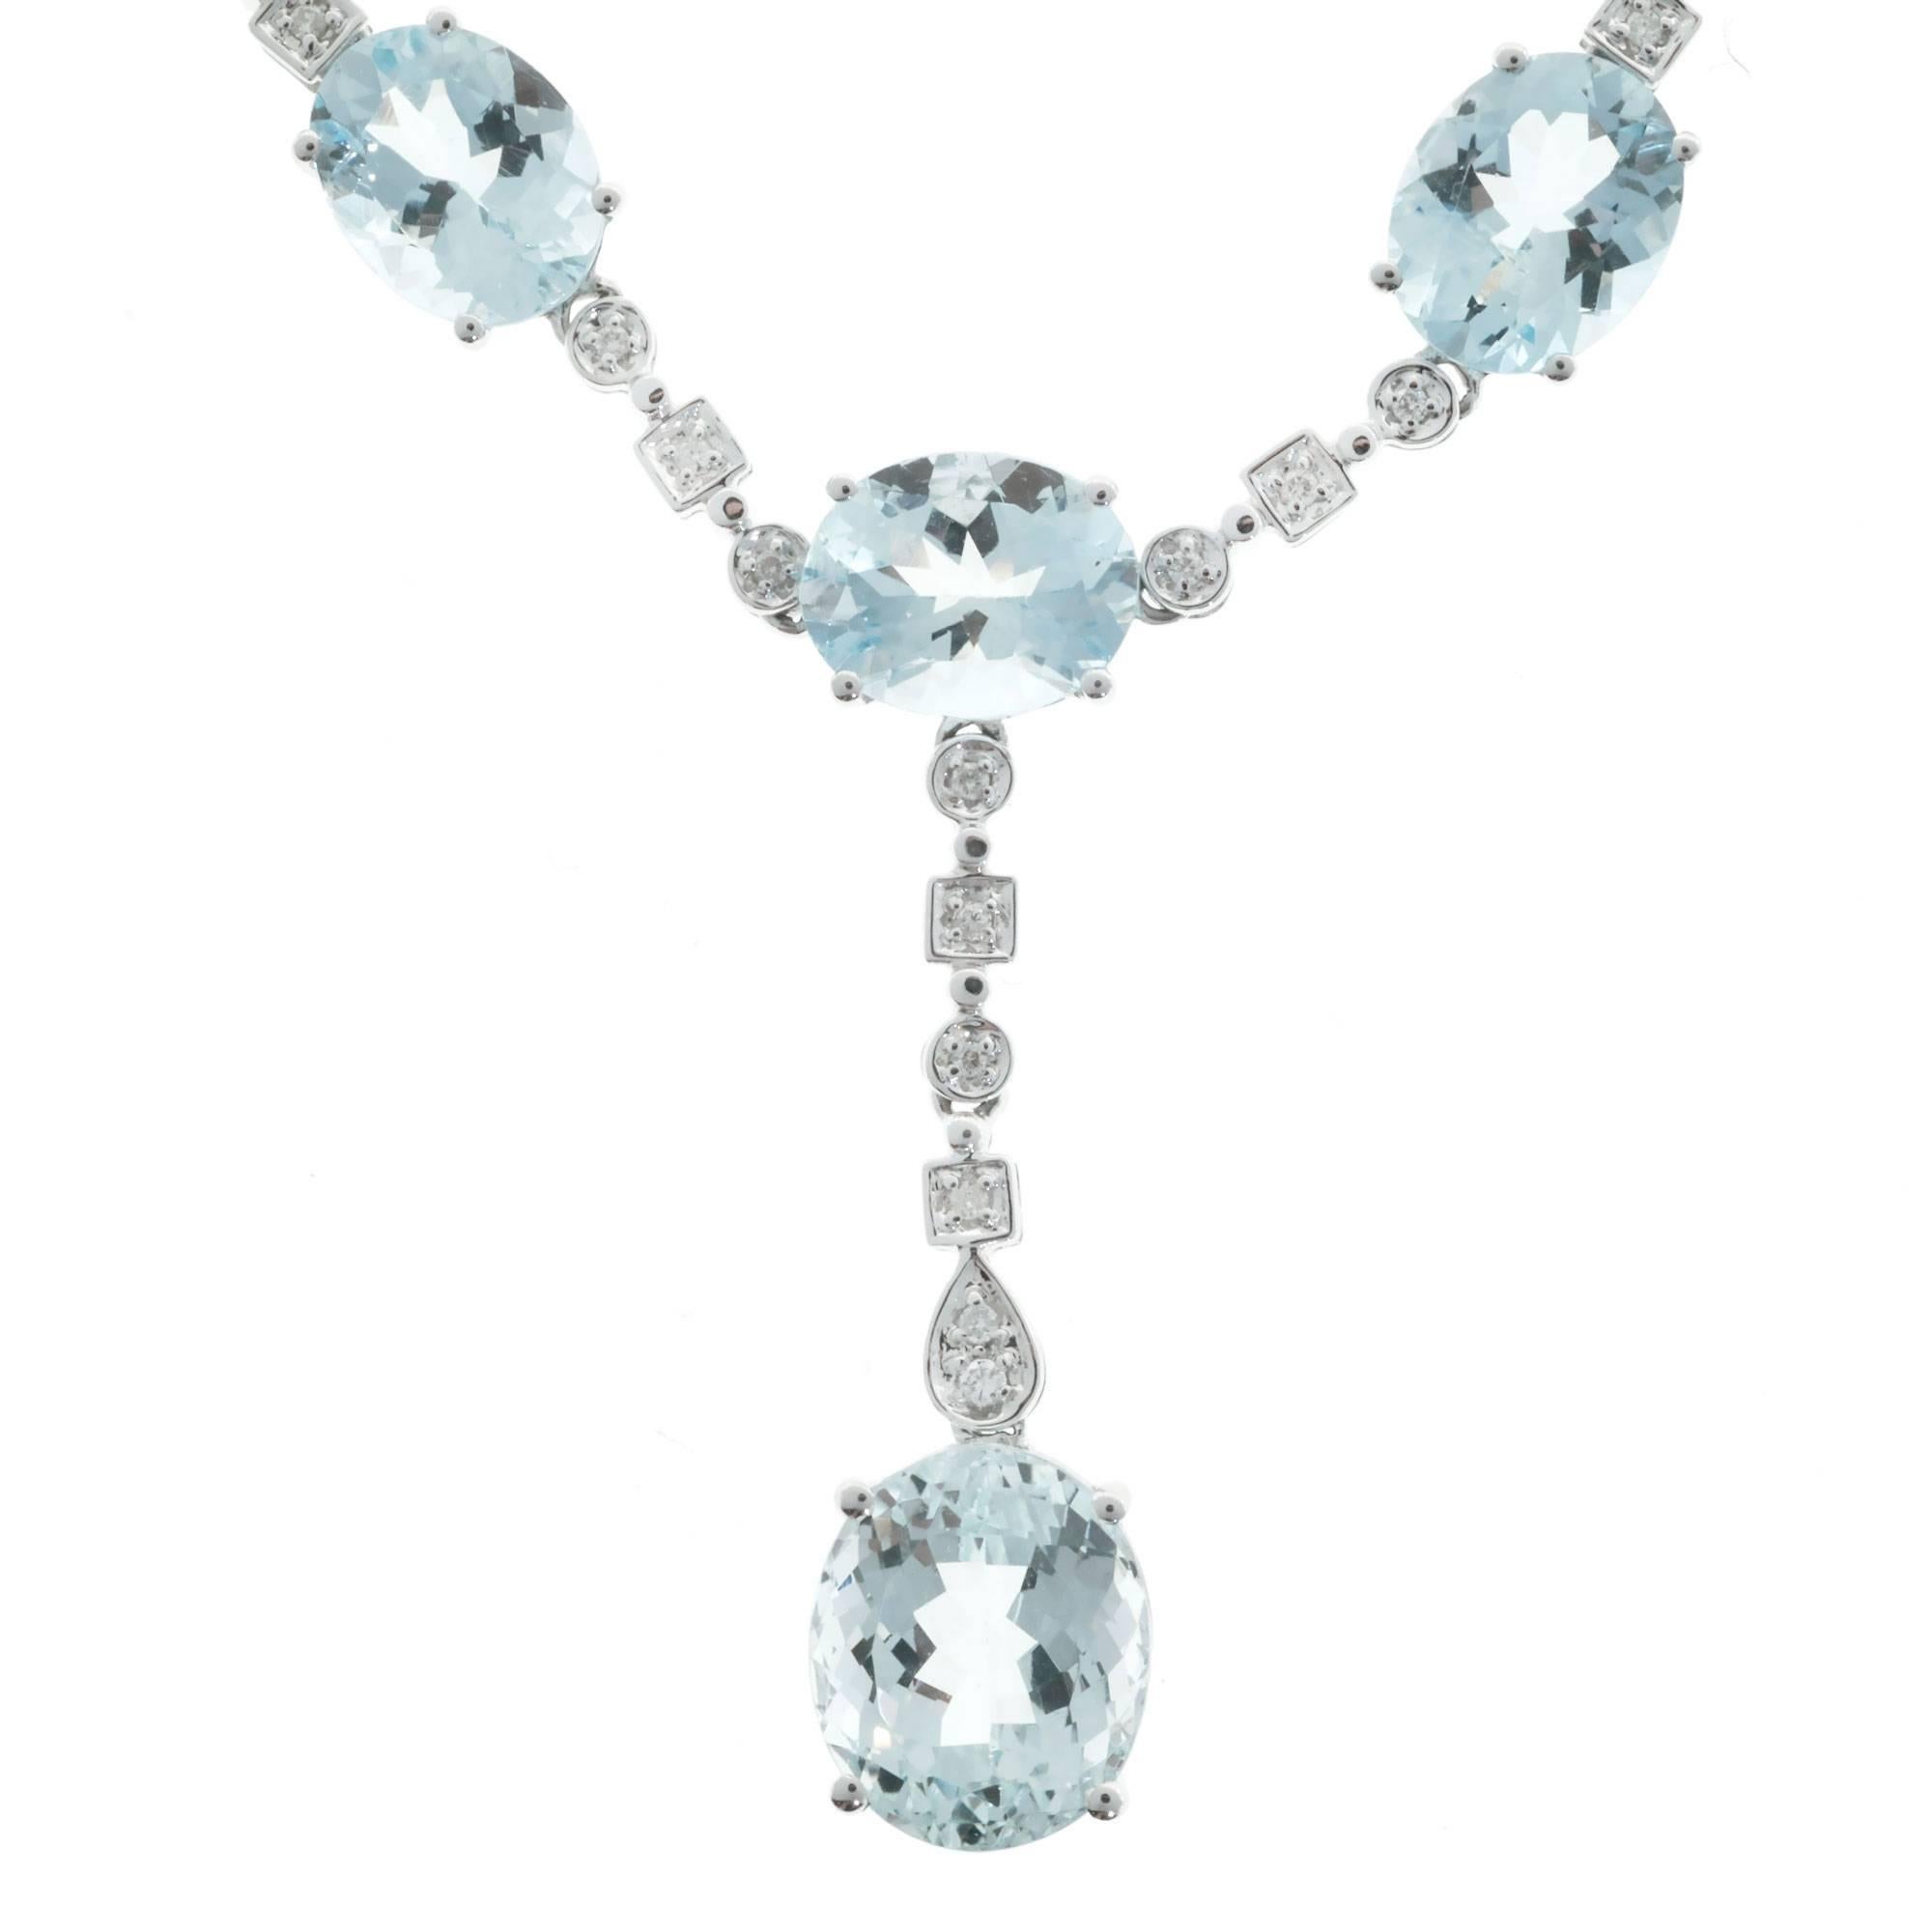 Dramatic “Y” style necklace with over 20.00cts of natural bright light blue Aqua in 18k white gold with diamond accents.

10 oval bright light greenish blue natural Aquamarines, approx. total weight 22.25cts, VS
30 round diamonds, approx. total